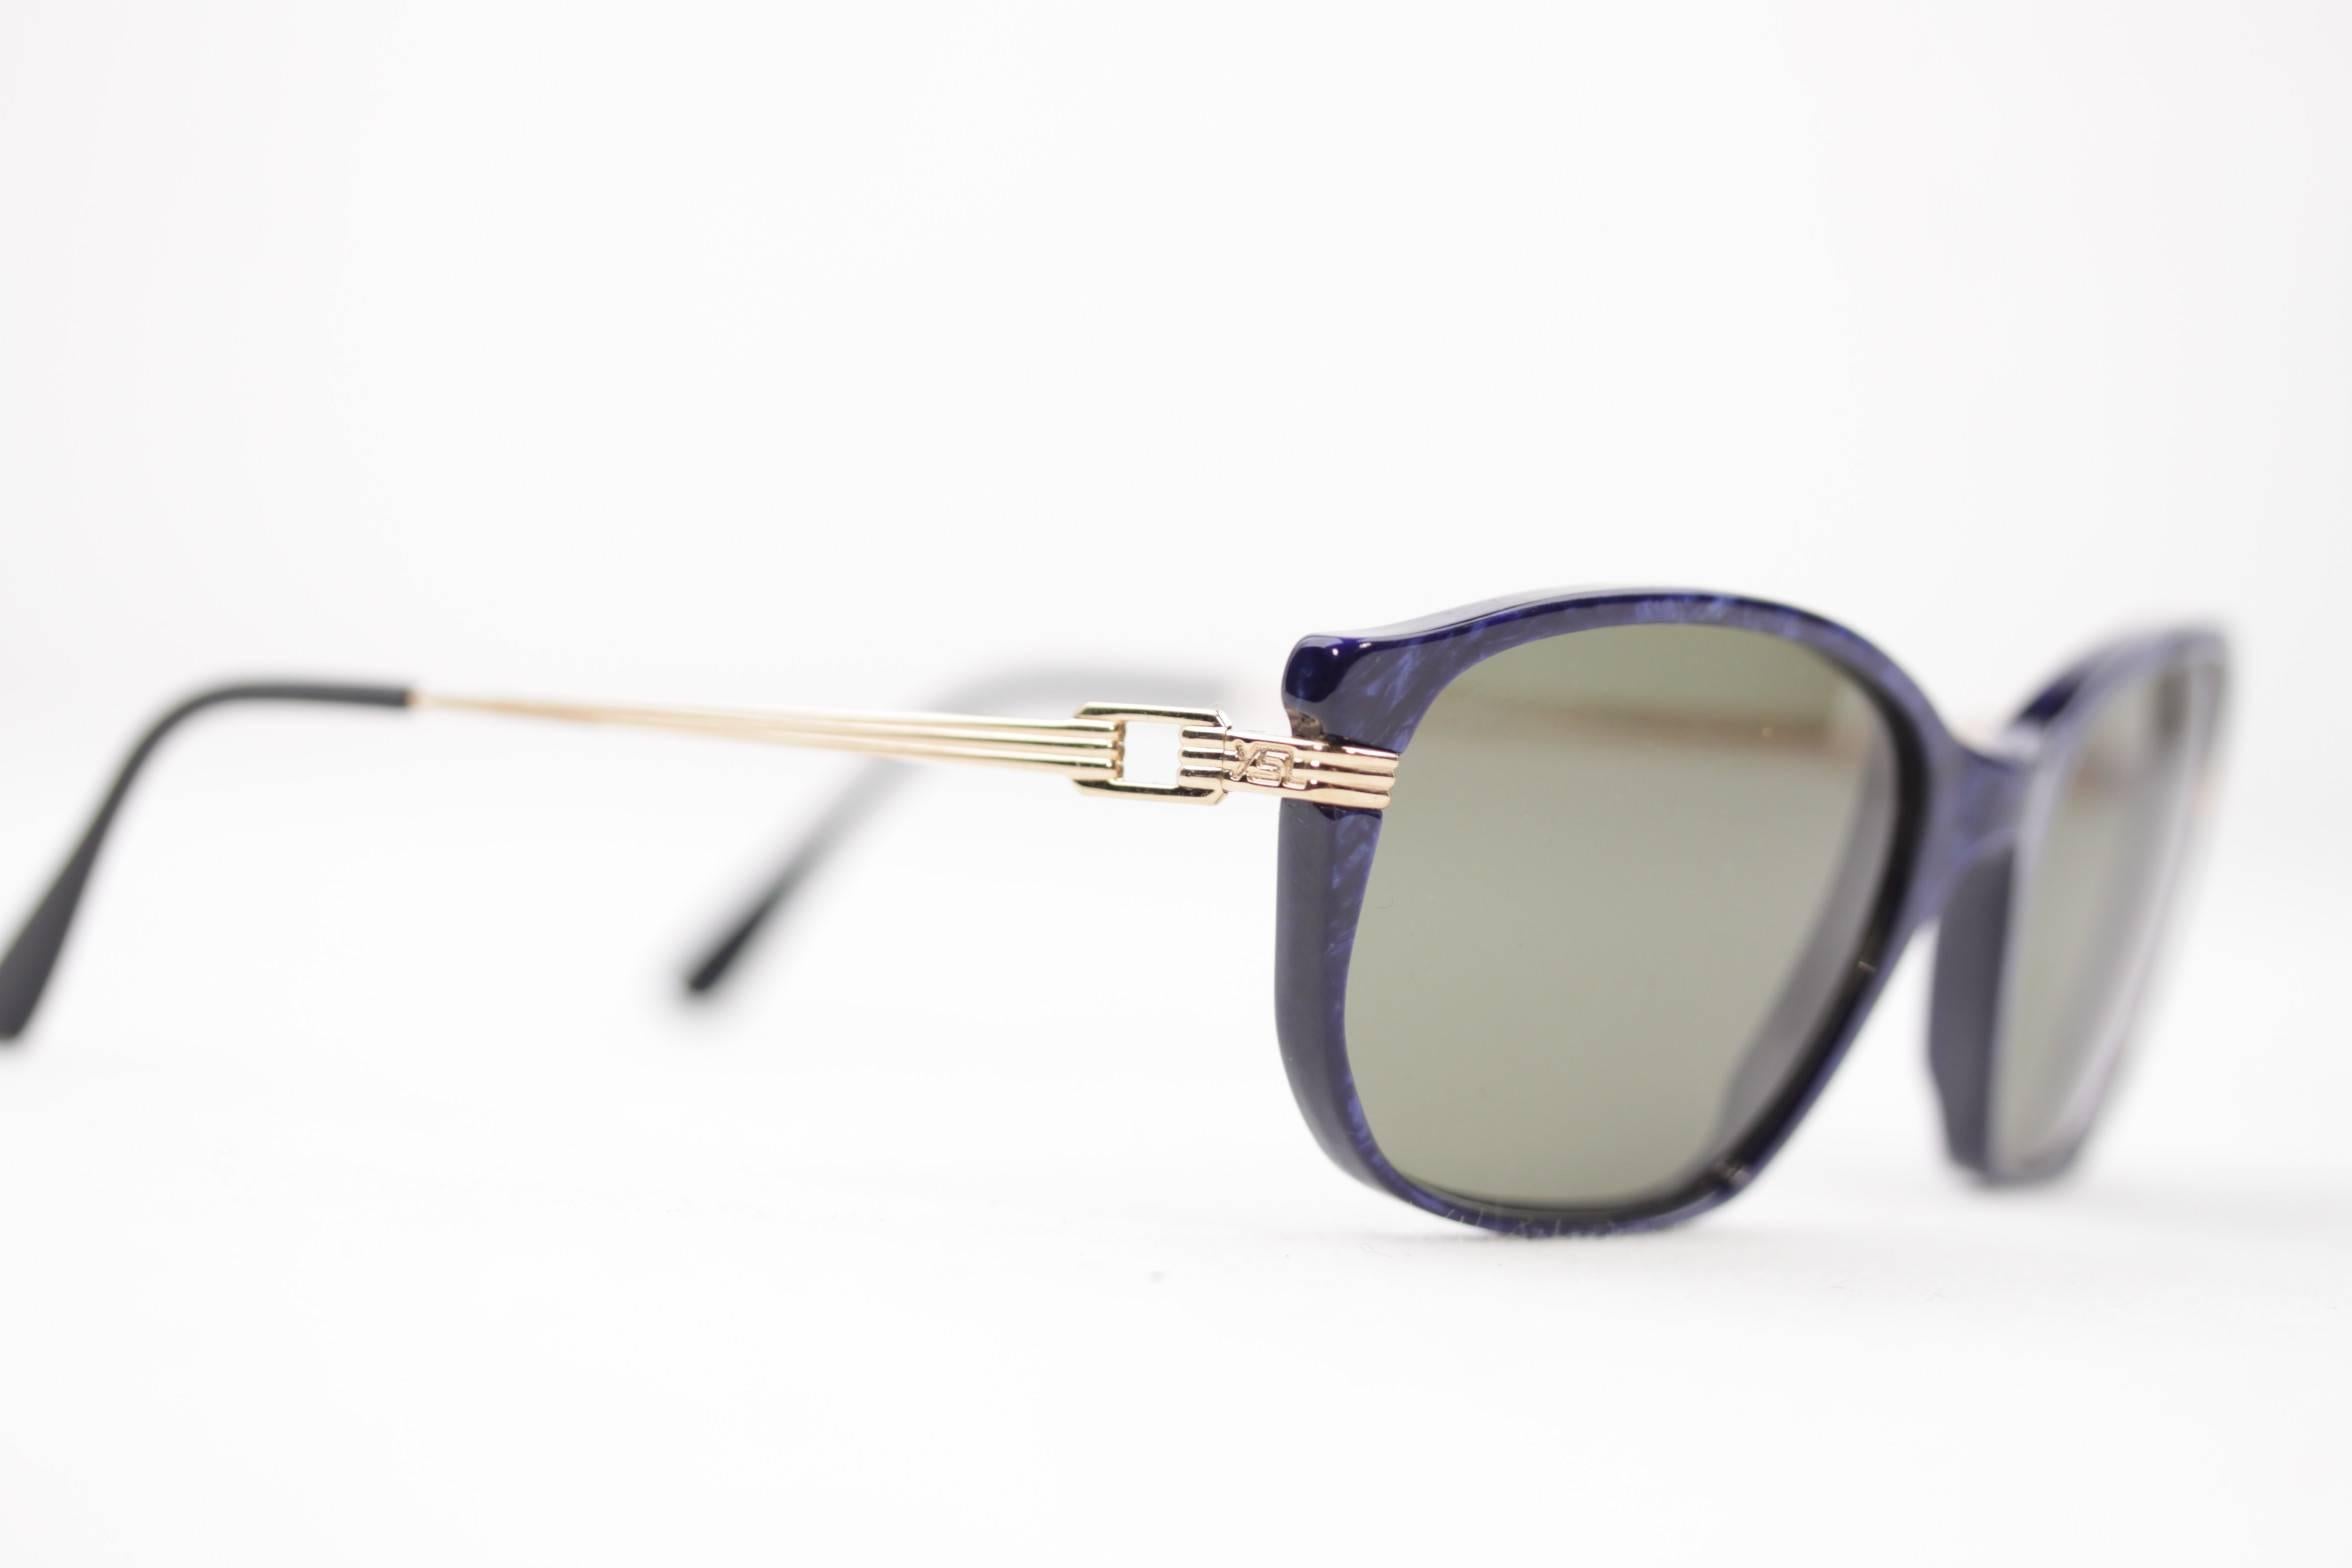 model refs: TITHON - 55/18 - 235

signed YVES SAINT LAURENT, made in Italy

Blue frame (marbled effect) with gold metal arms

Green Lenses

Any other detail which is not mentioned may be seen on the item pictures. Please do ask if anything